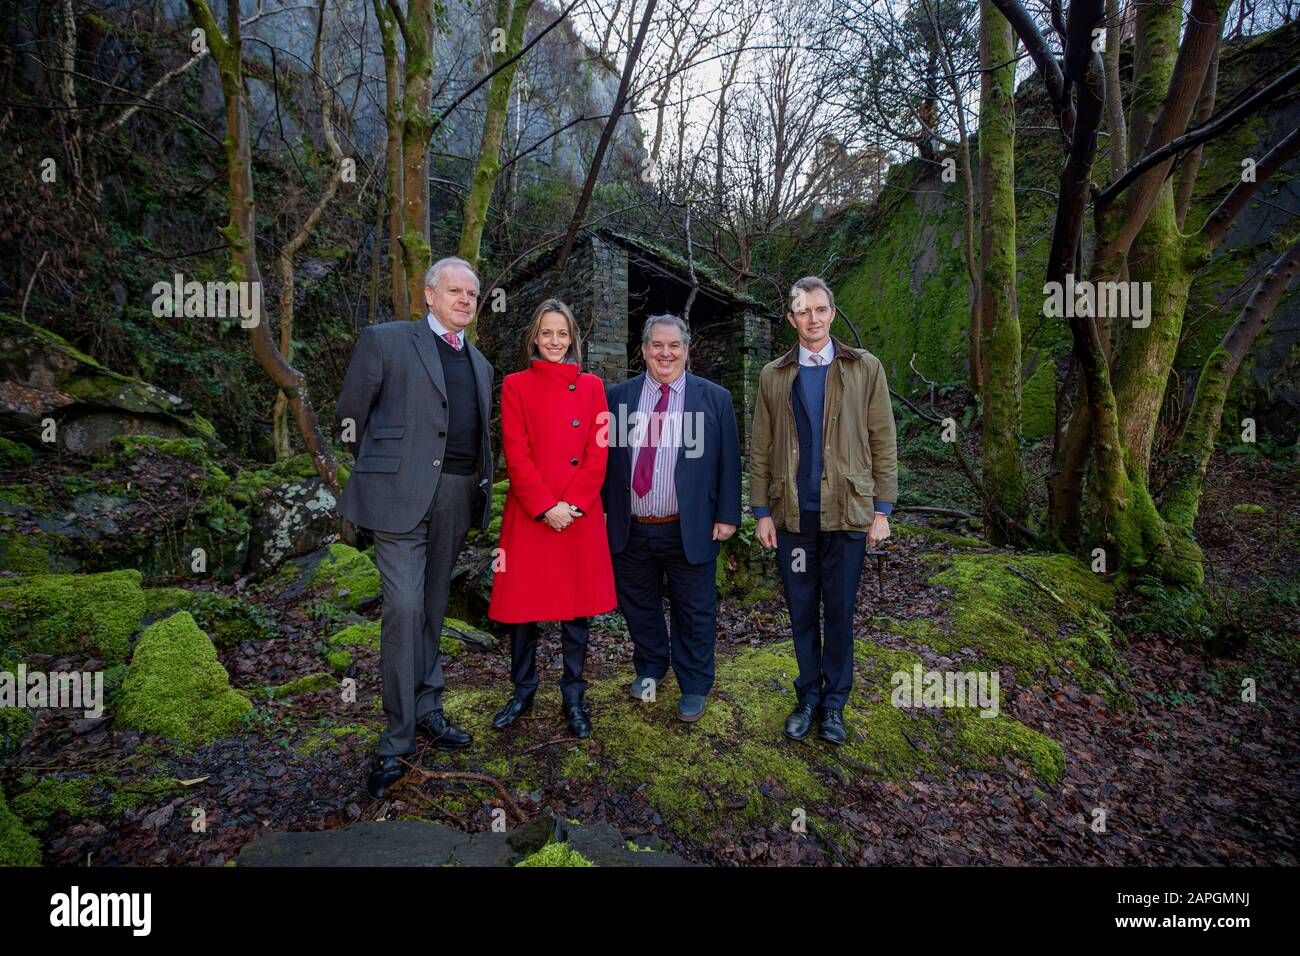 EMBARGOED TO 0001 FRIDAY JANUARY 24 (Left to right) Dr David Gwyn (historian, Heritage Minister Helen Whatley, Cllr Gareth Thomas and UK Welsh Minister David Davies at the Welsh Slate Museum in Llanberis, to mark the news that the slate mining landscape of northwest Wales could be the UK???s next UNESCO World Heritage site. Stock Photo